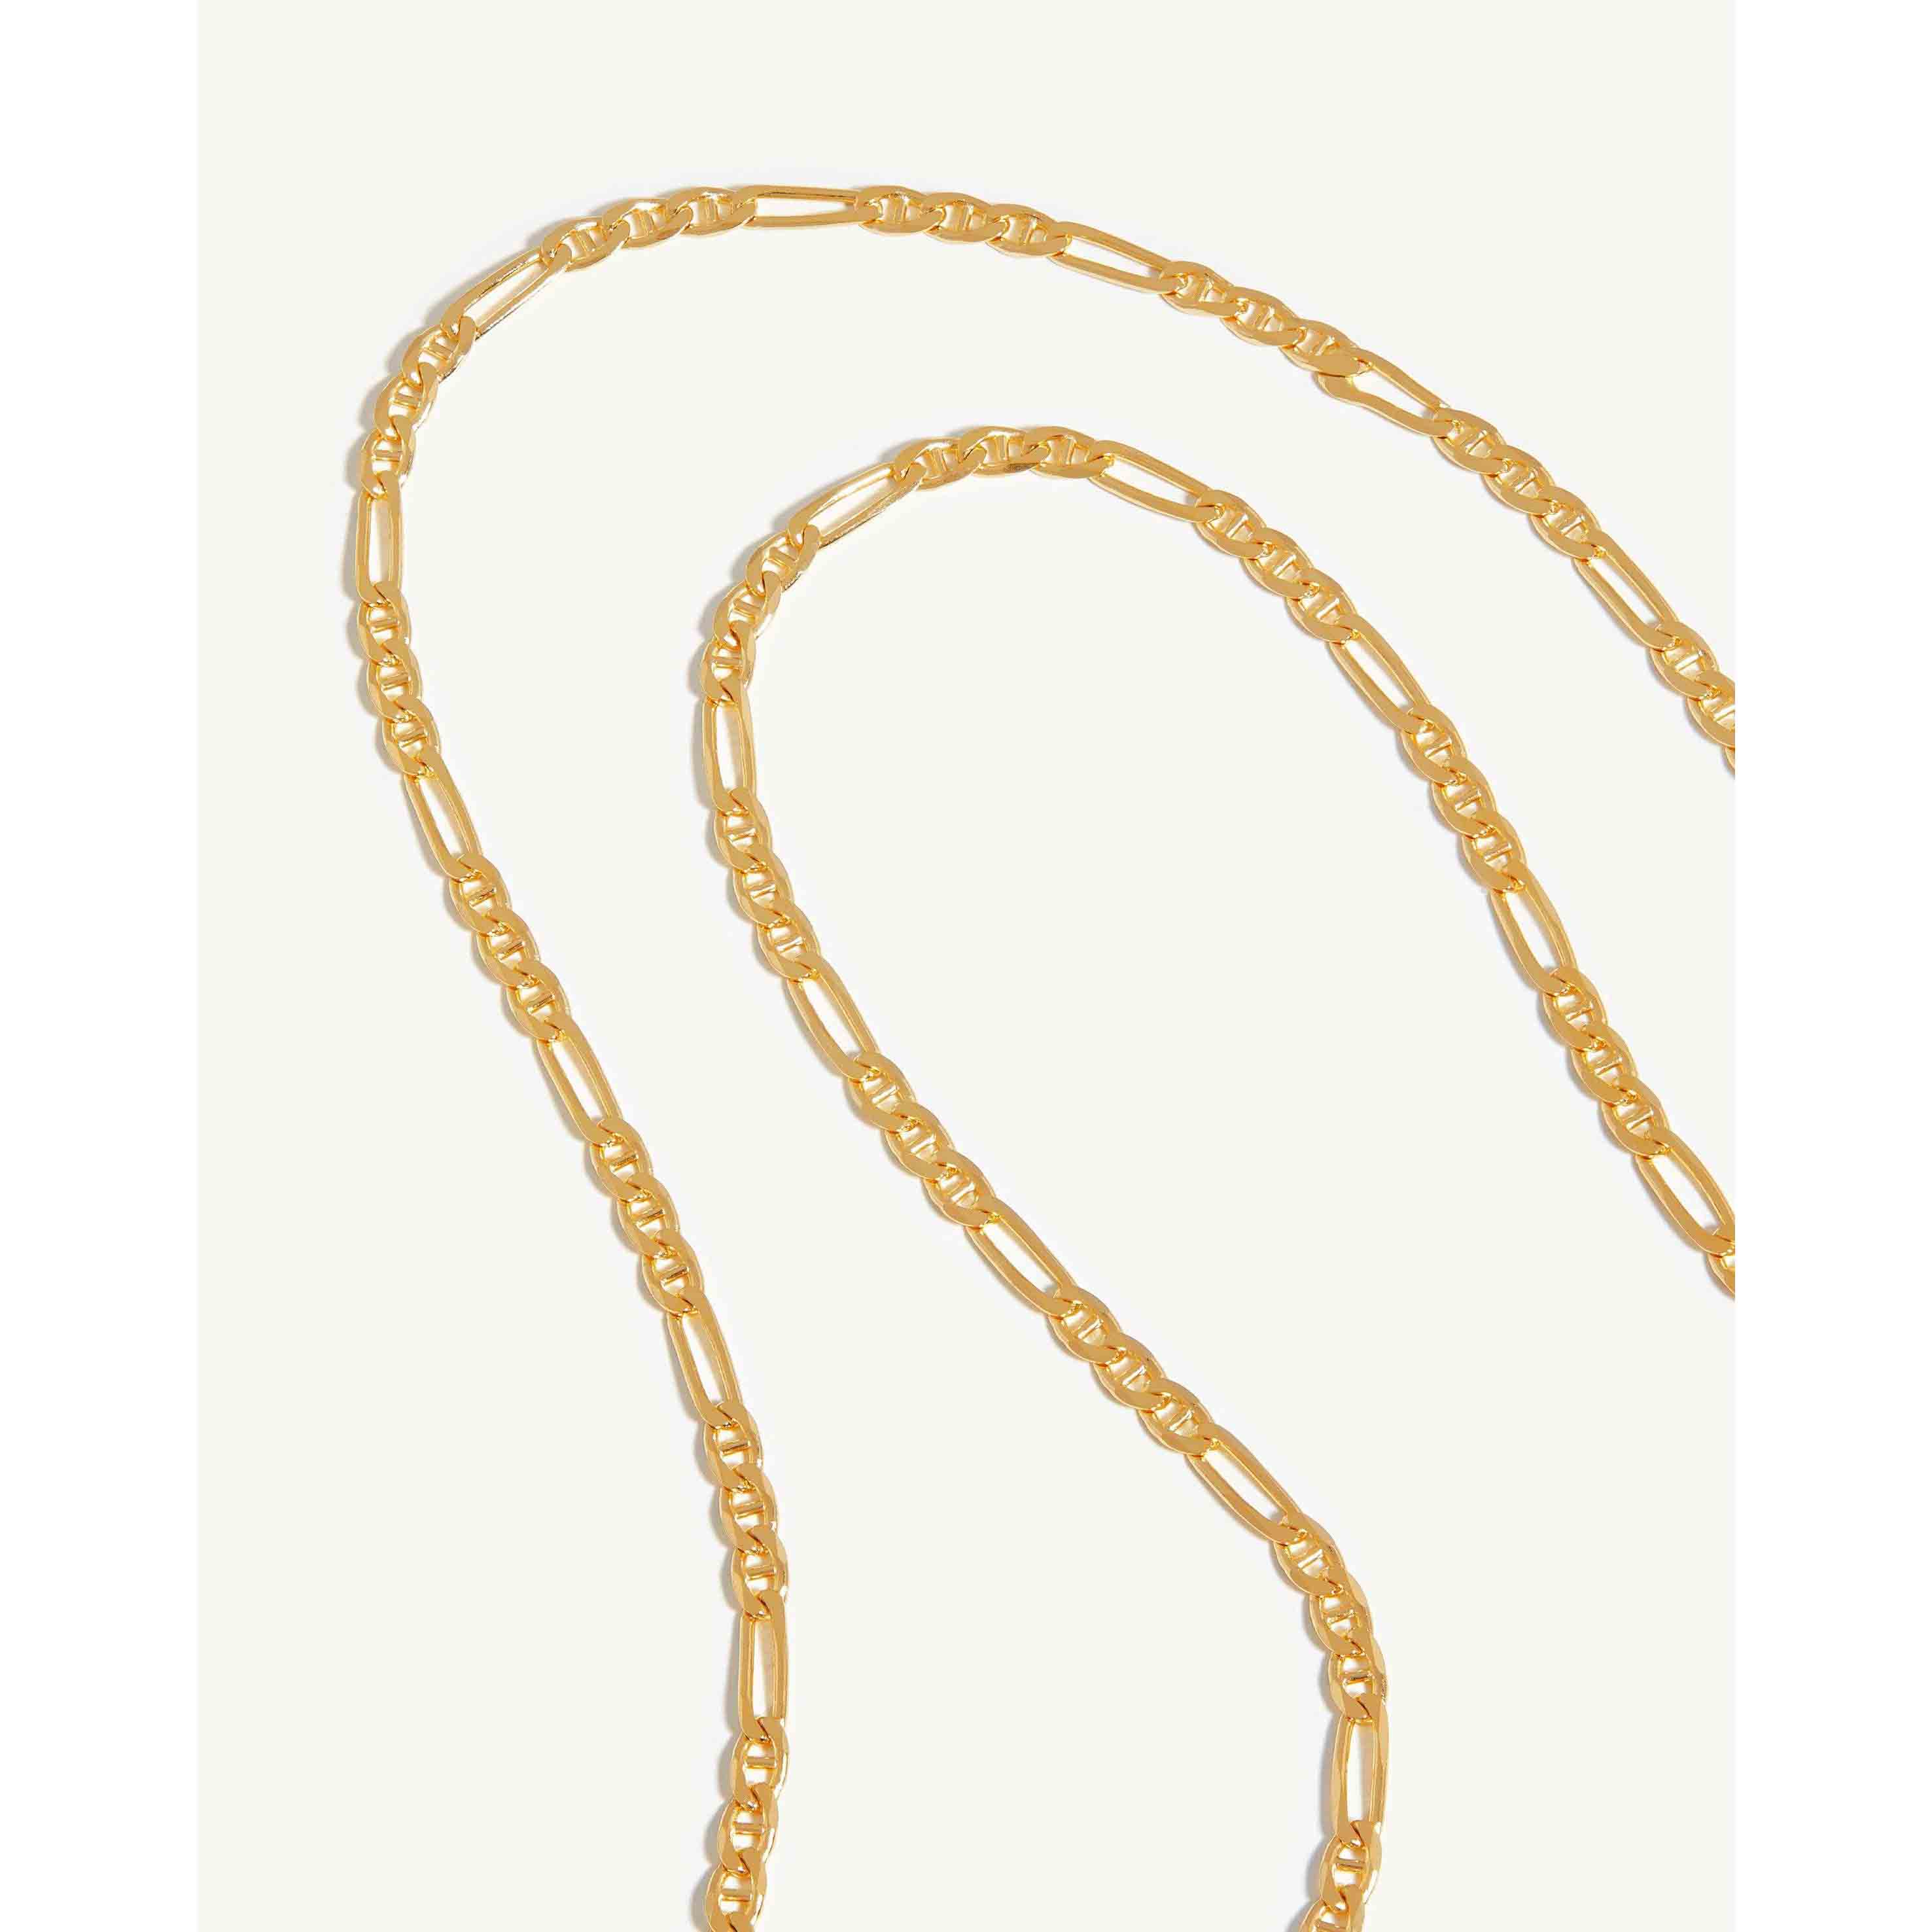 Italy jewelry store custom made 1000 pieces of curb chain necklaces vermeil 18k gold on silver